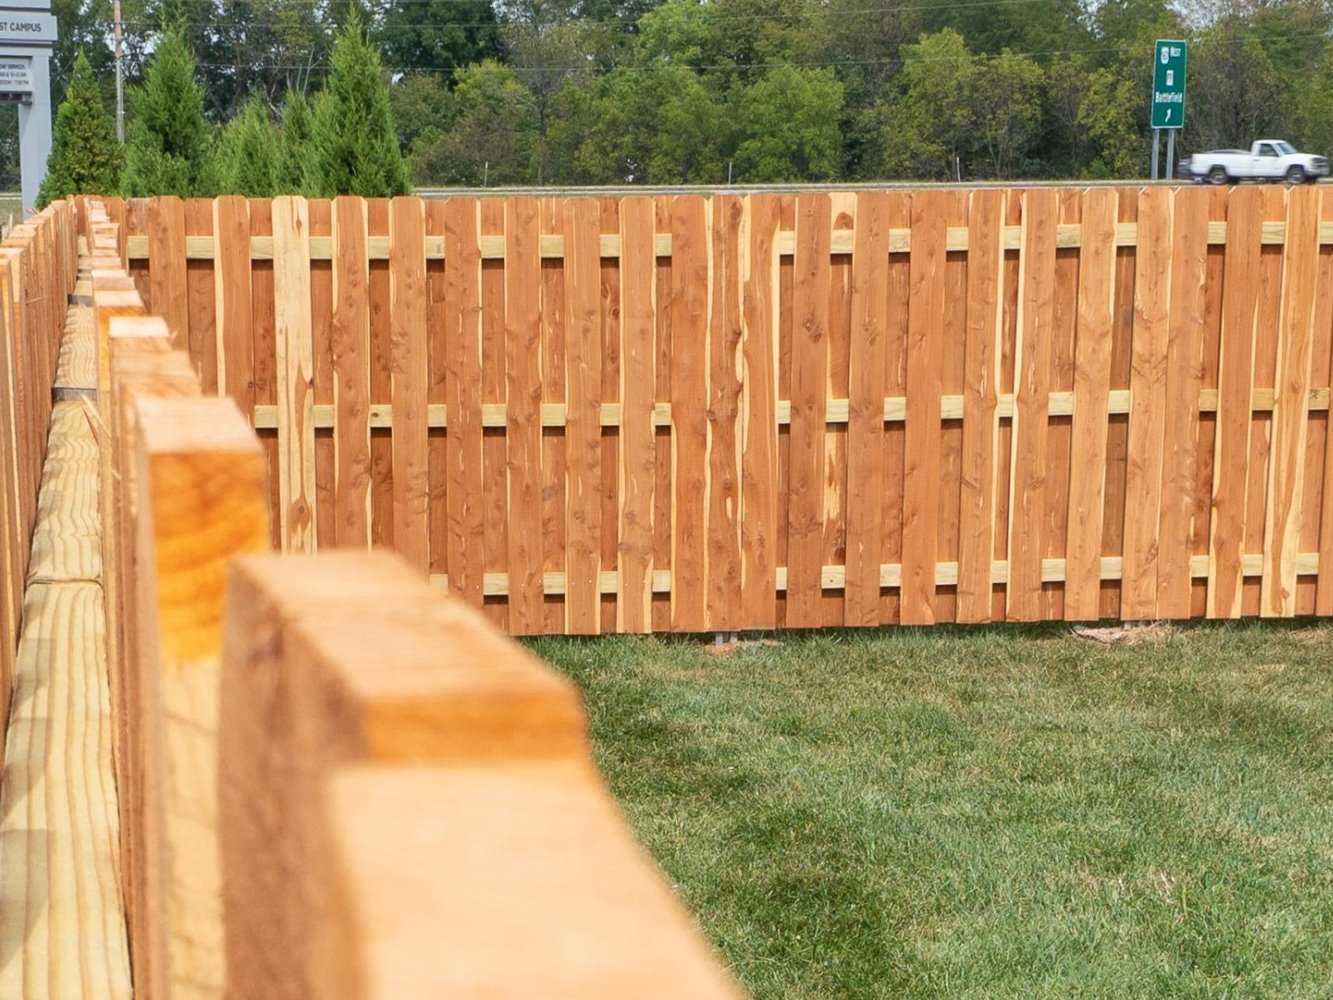 Springfield, Missouri Fences: Which Type of Fence Is Best?